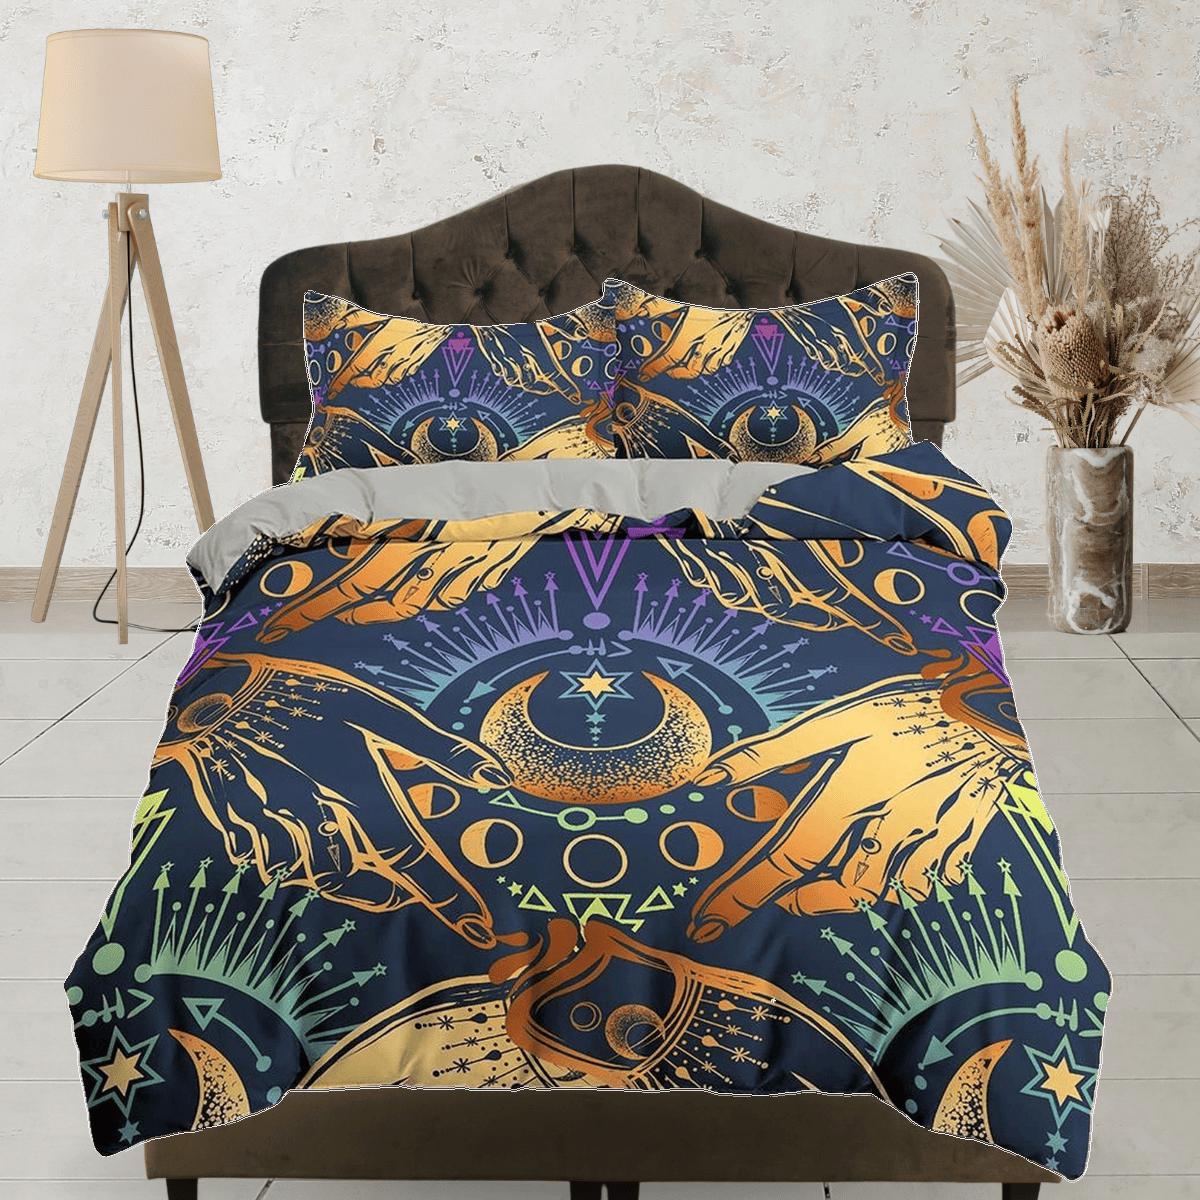 daintyduvet Gypsy bedding moon mystical, witchy decor dorm bedding, aesthetic duvet cover, boho bedding set full king queen, astrology gifts, gothic